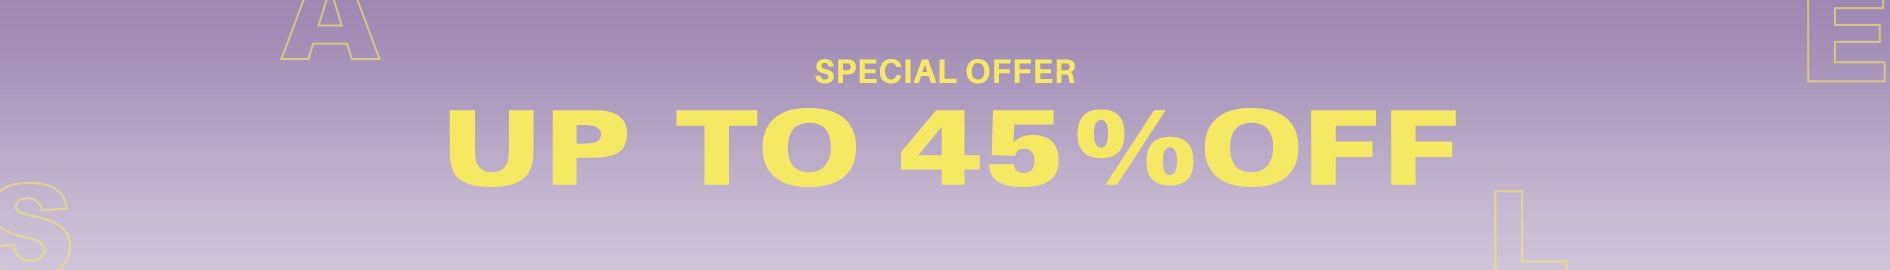 SPECIAL OFFER - UP TO 45%OFF